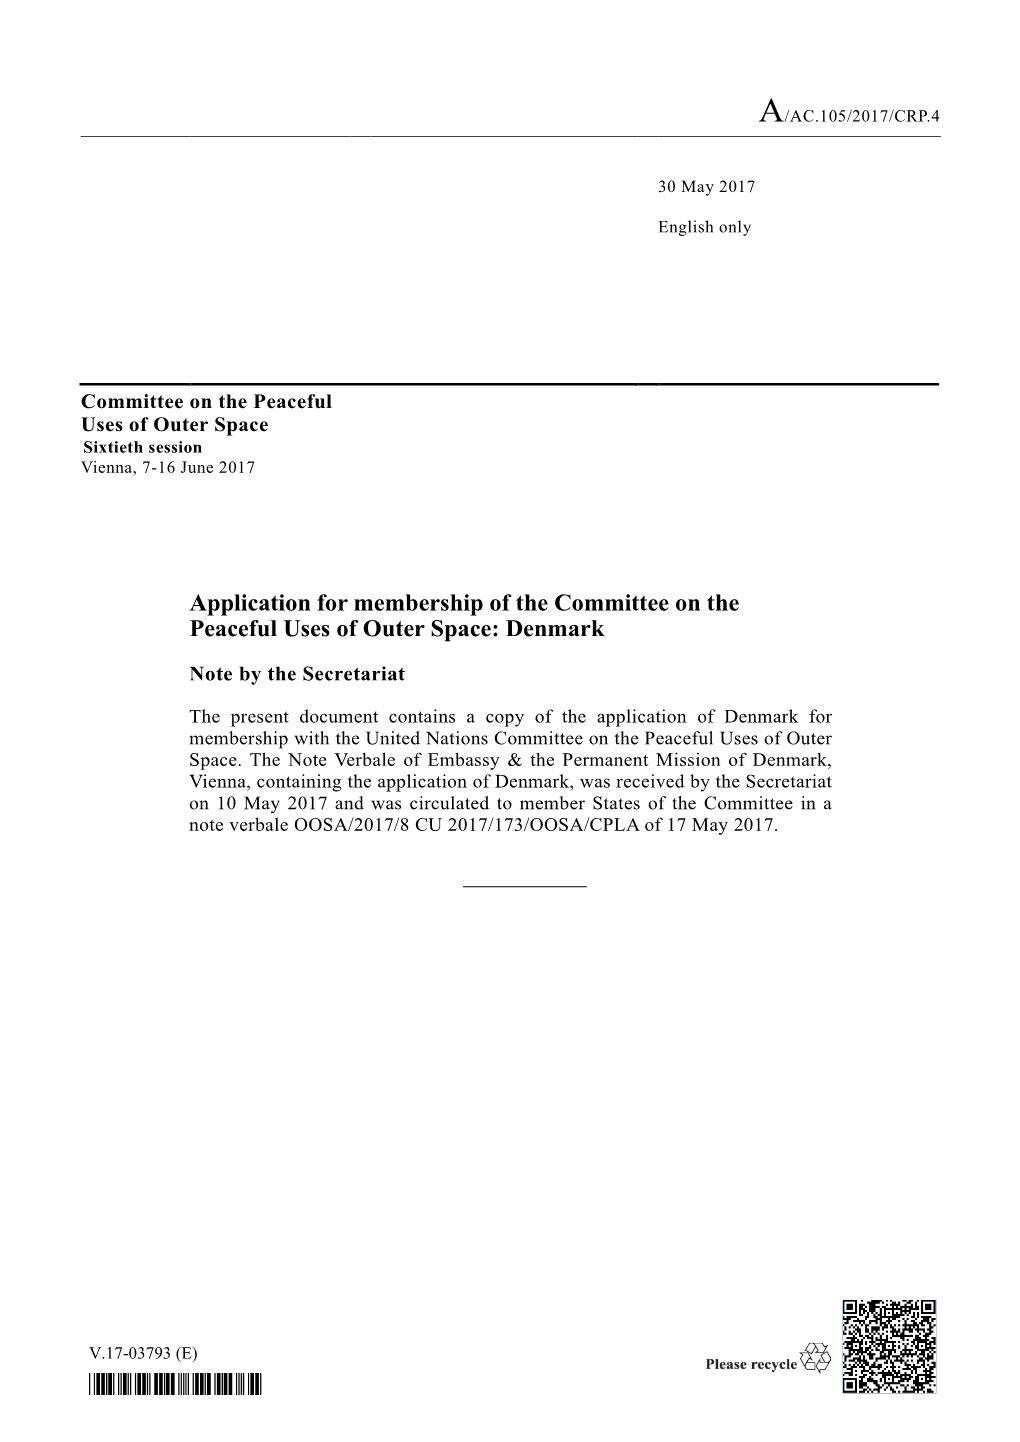 Application for Membership of the Committee on the Peaceful Uses of Outer Space: Denmark